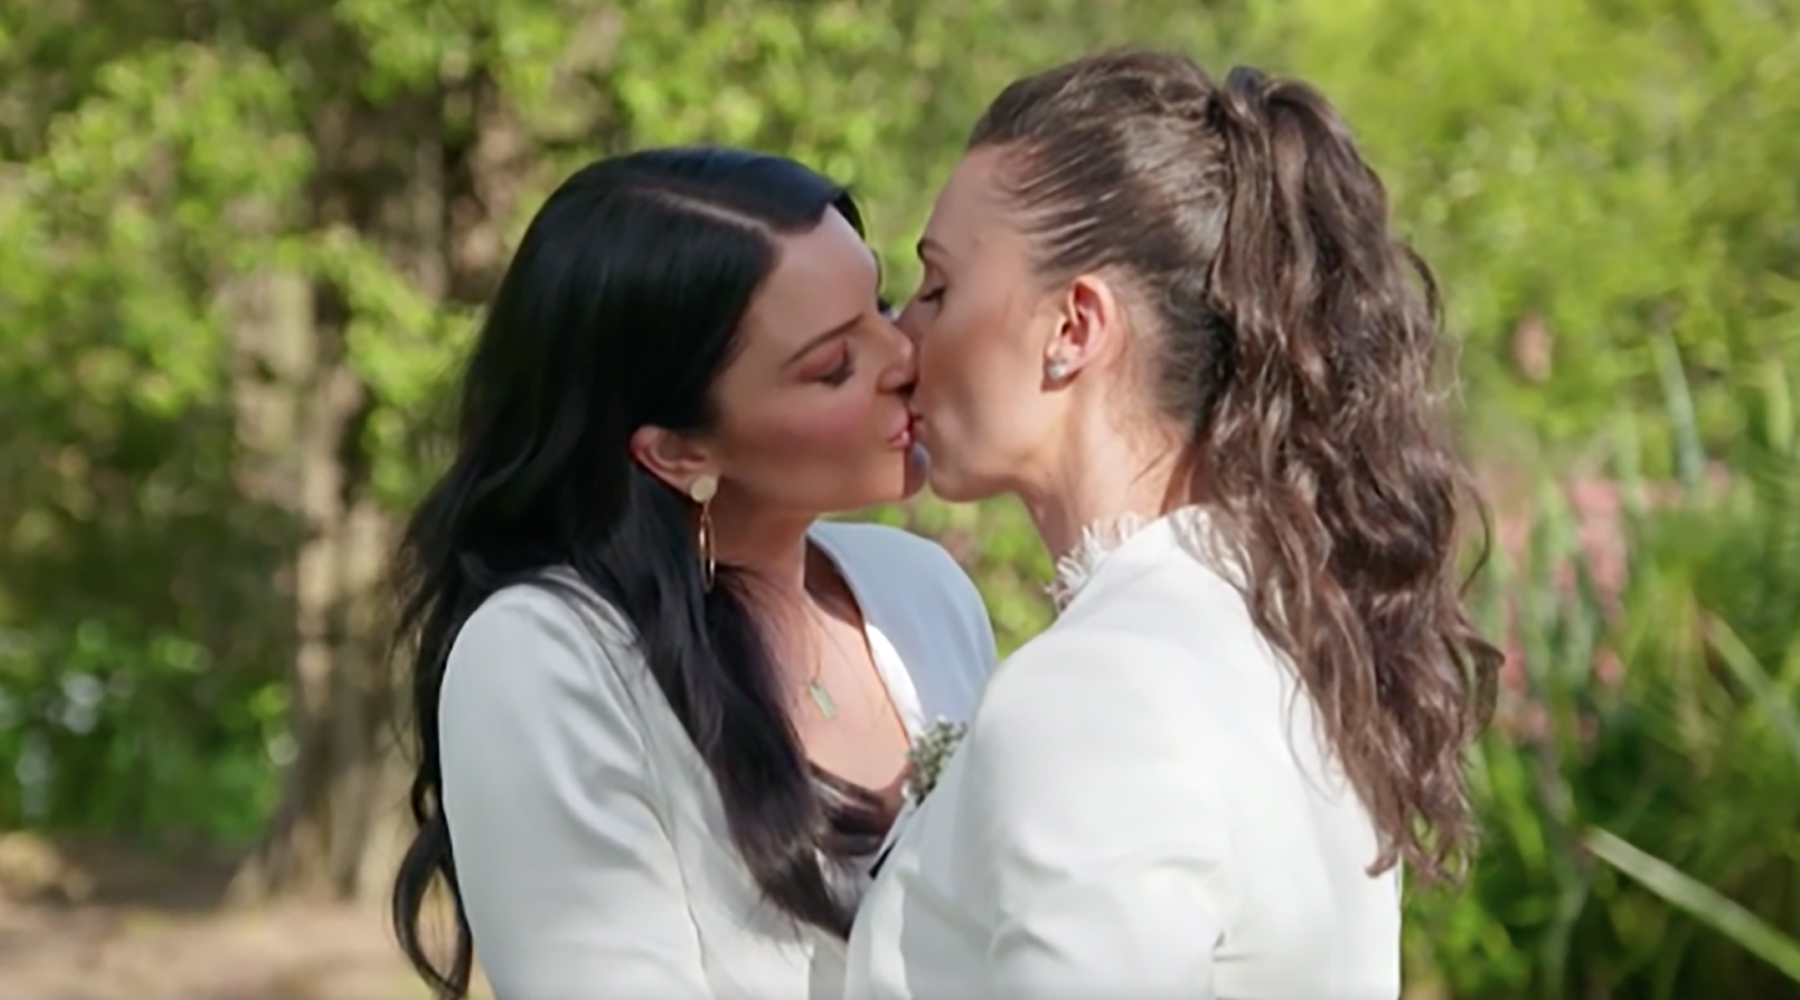 Married at first sight lesbian couples